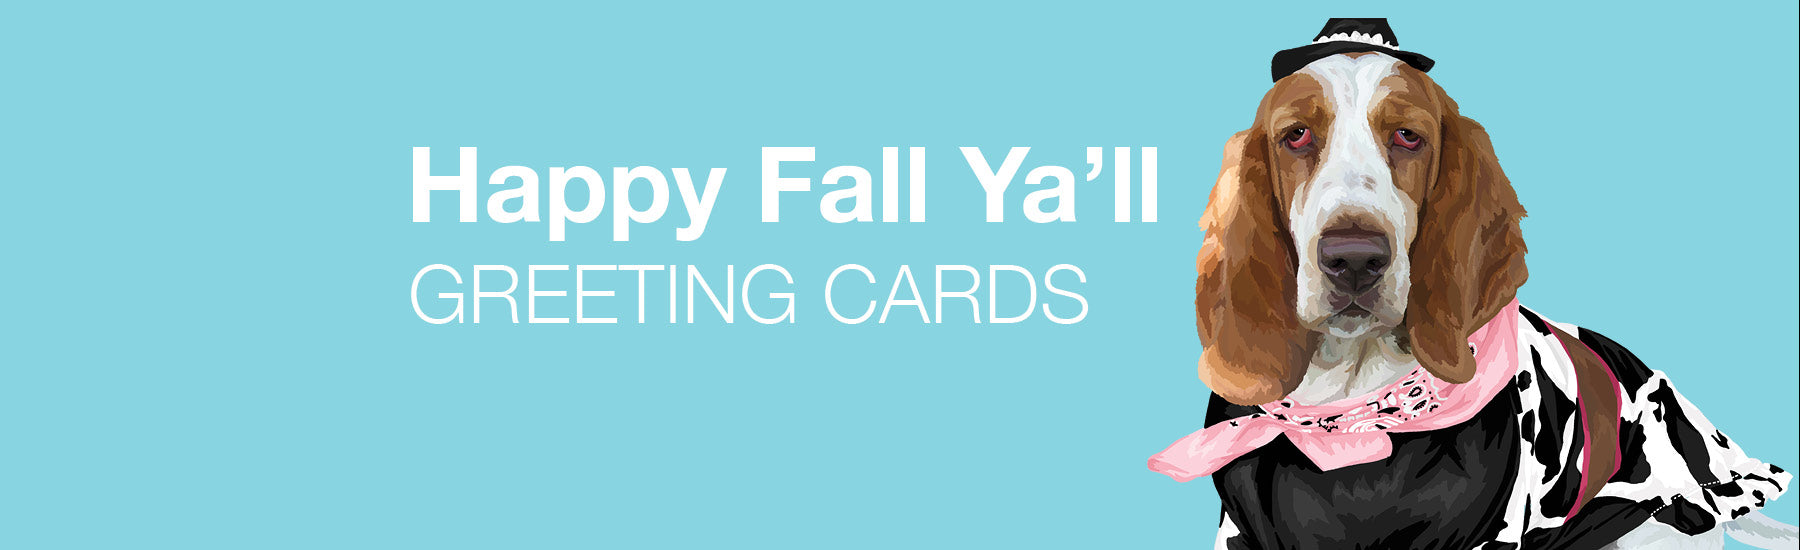 FALL GREETING CARDS